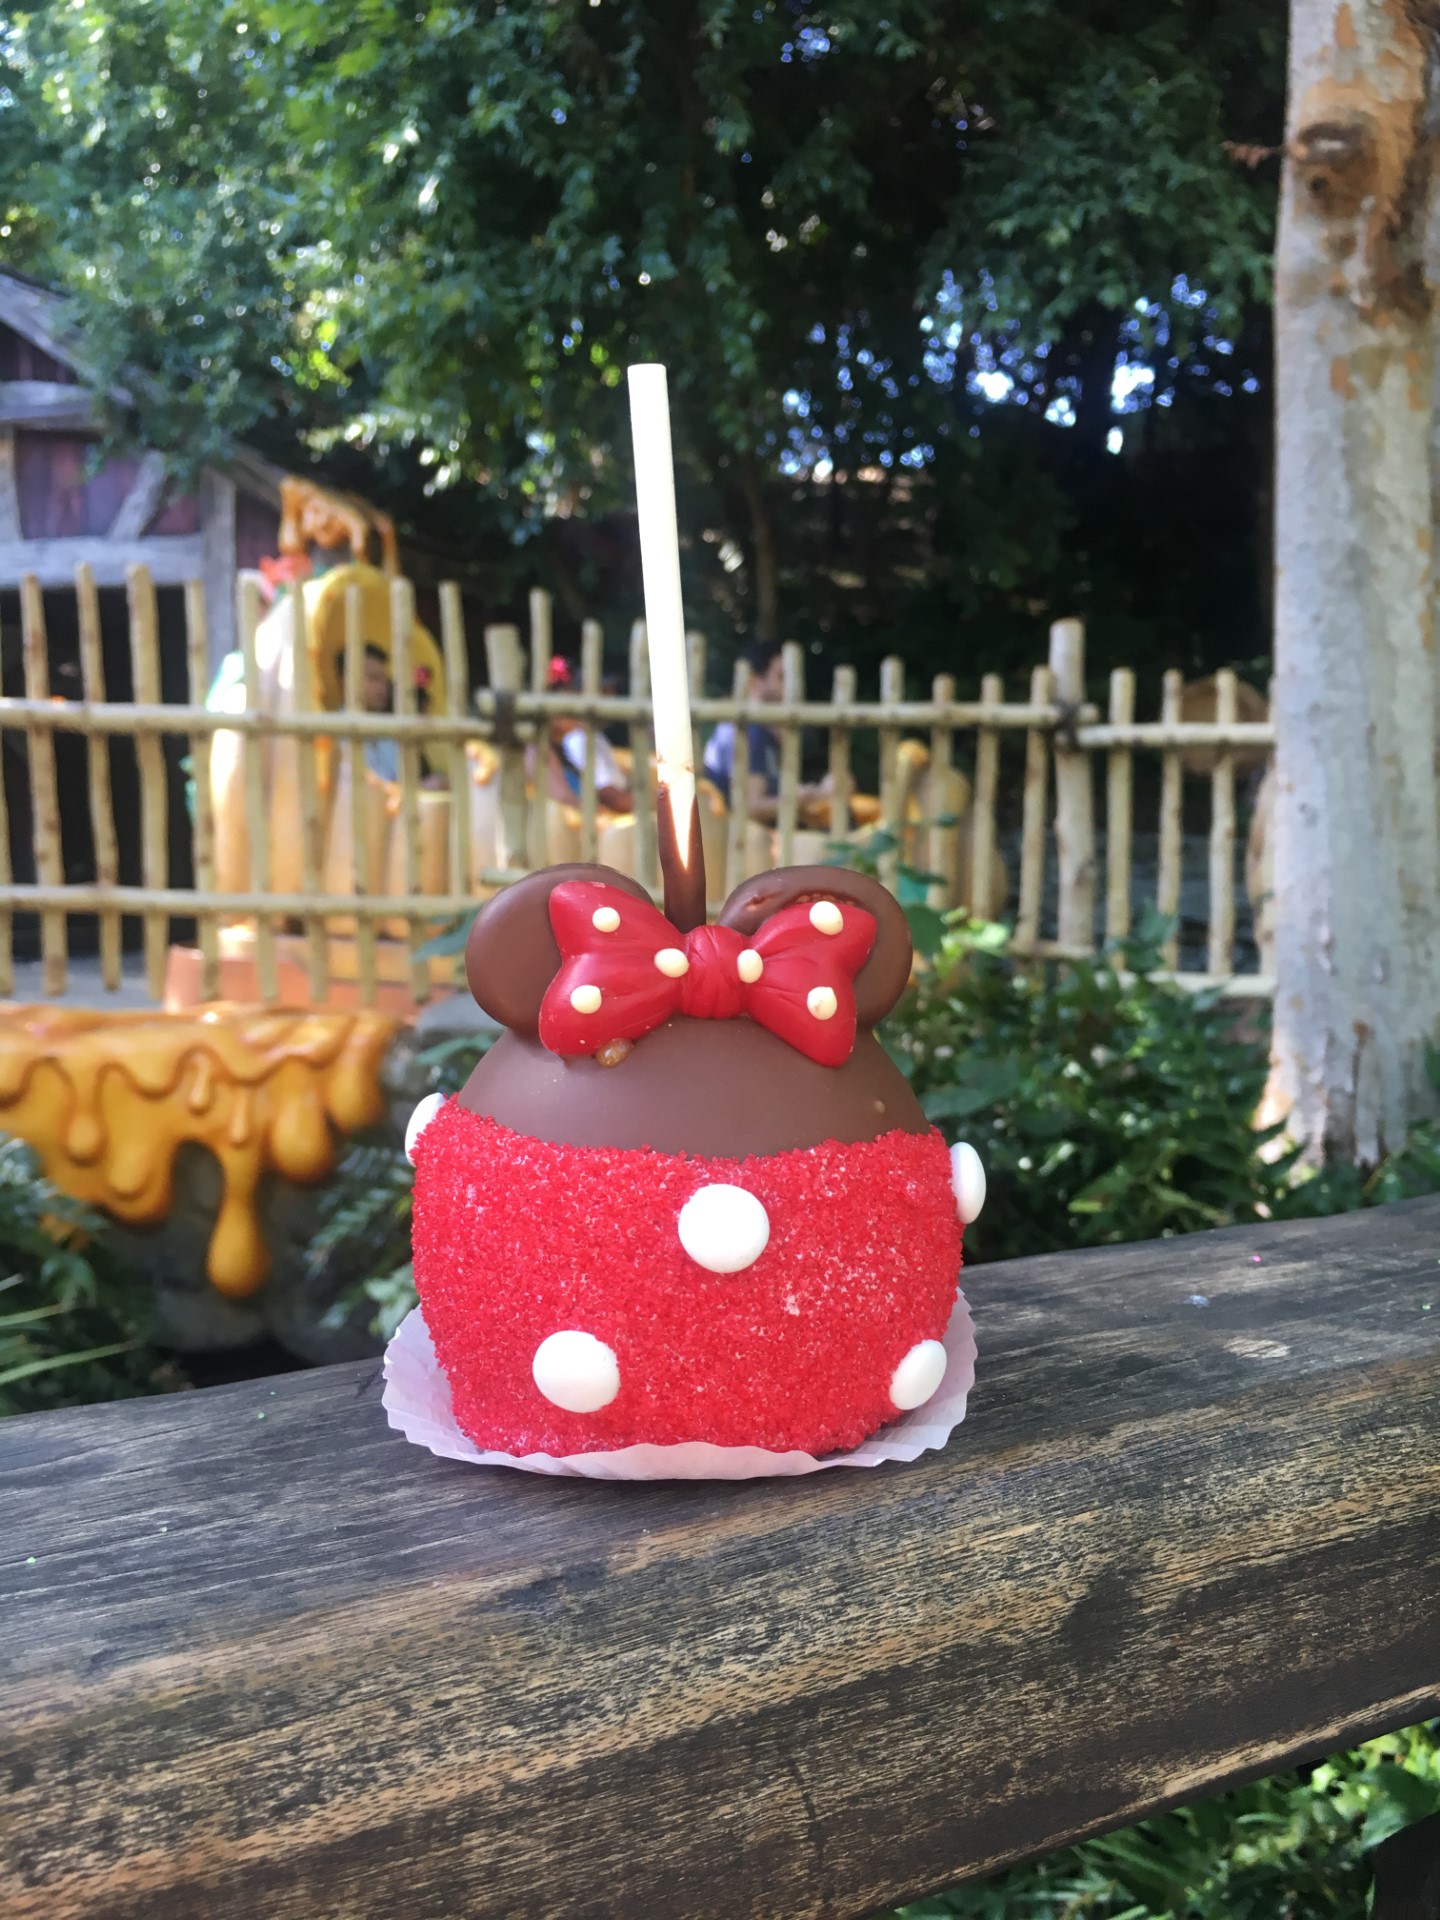 Disneyland Resort Anaheim best desserts include Minnie Mouse chocolate covered apple with red sanding sugar this image near the Splash Mountain area 